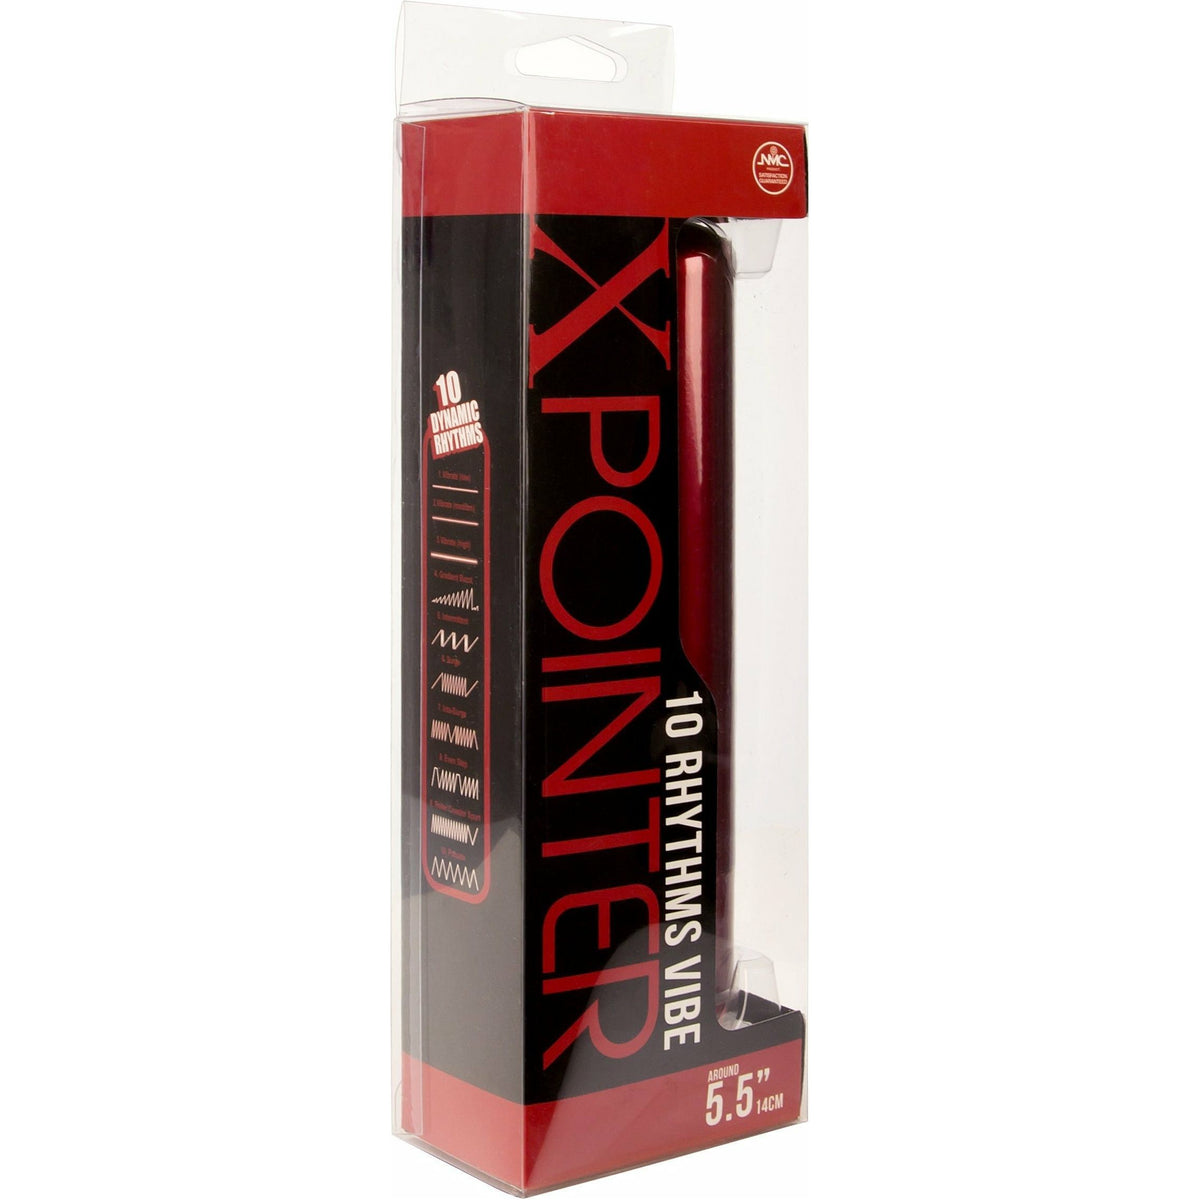 NMC X Pointer - 5.5 Inch Bullet Vibrator - Red